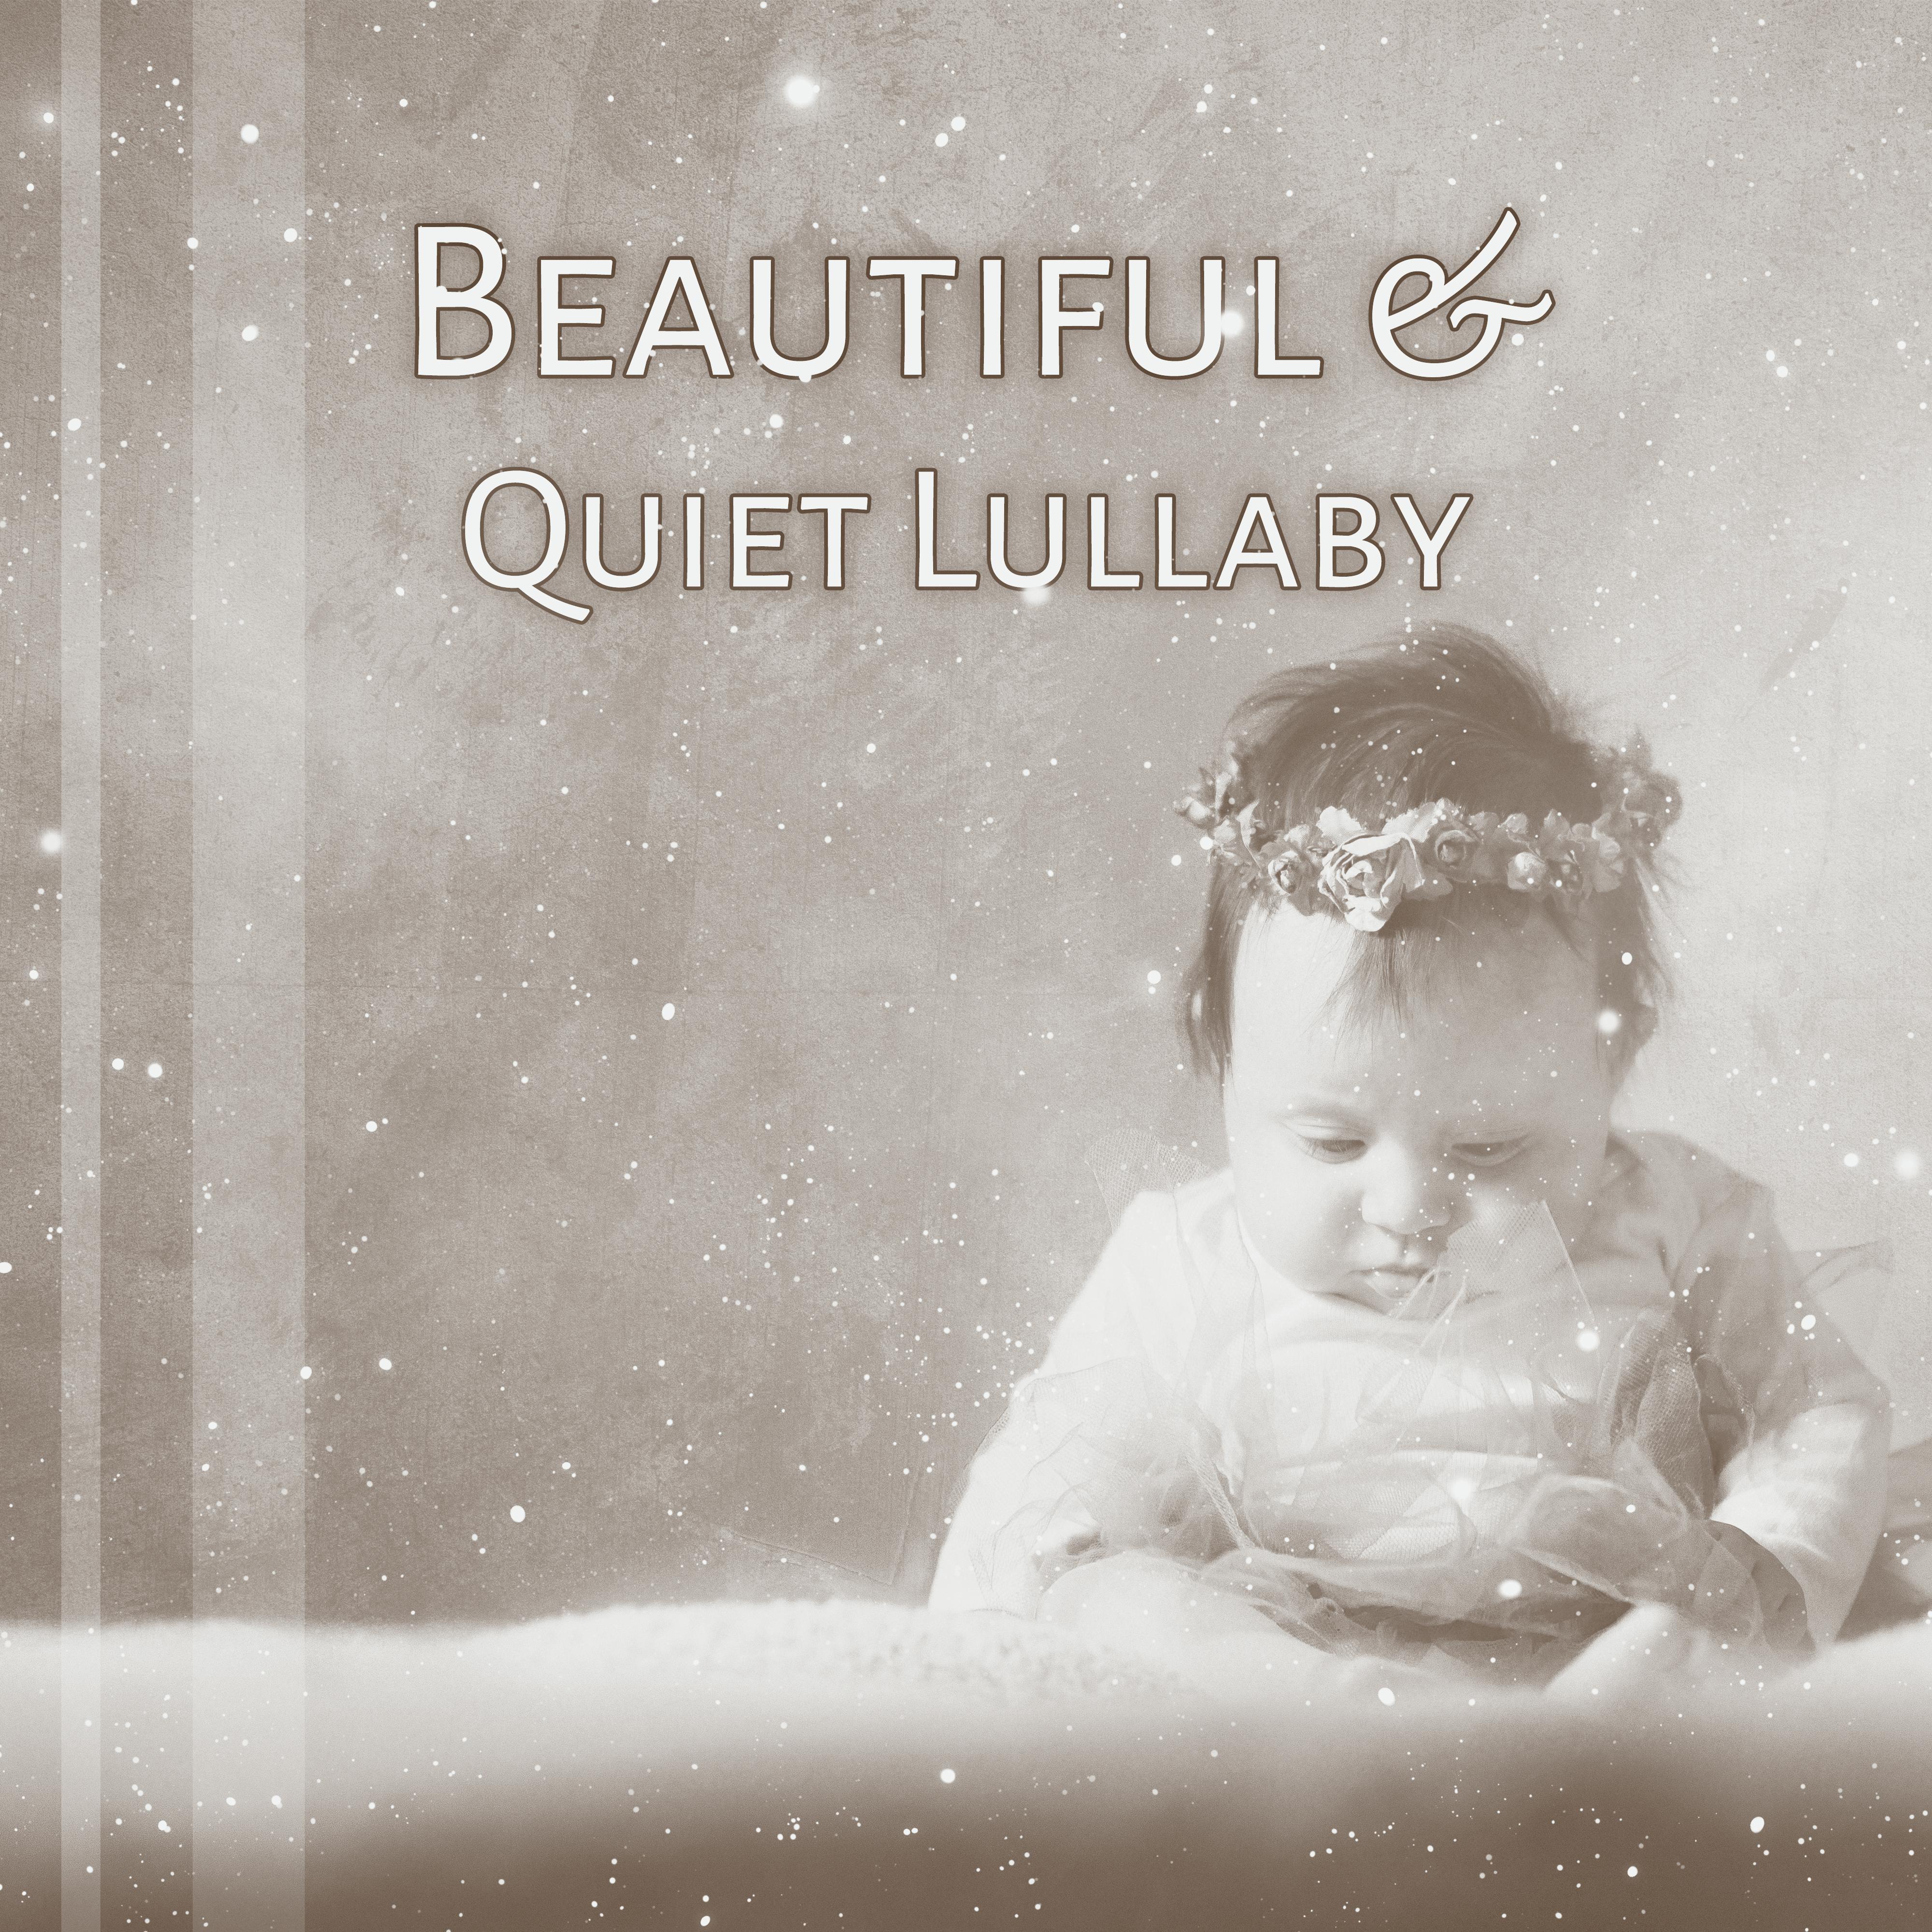 Beautiful & Quiet Lullaby – Music to Bed, Deep Sleep Your Baby, Peaceful Mind, Calm Nap, Songs to Pillow, Schubert